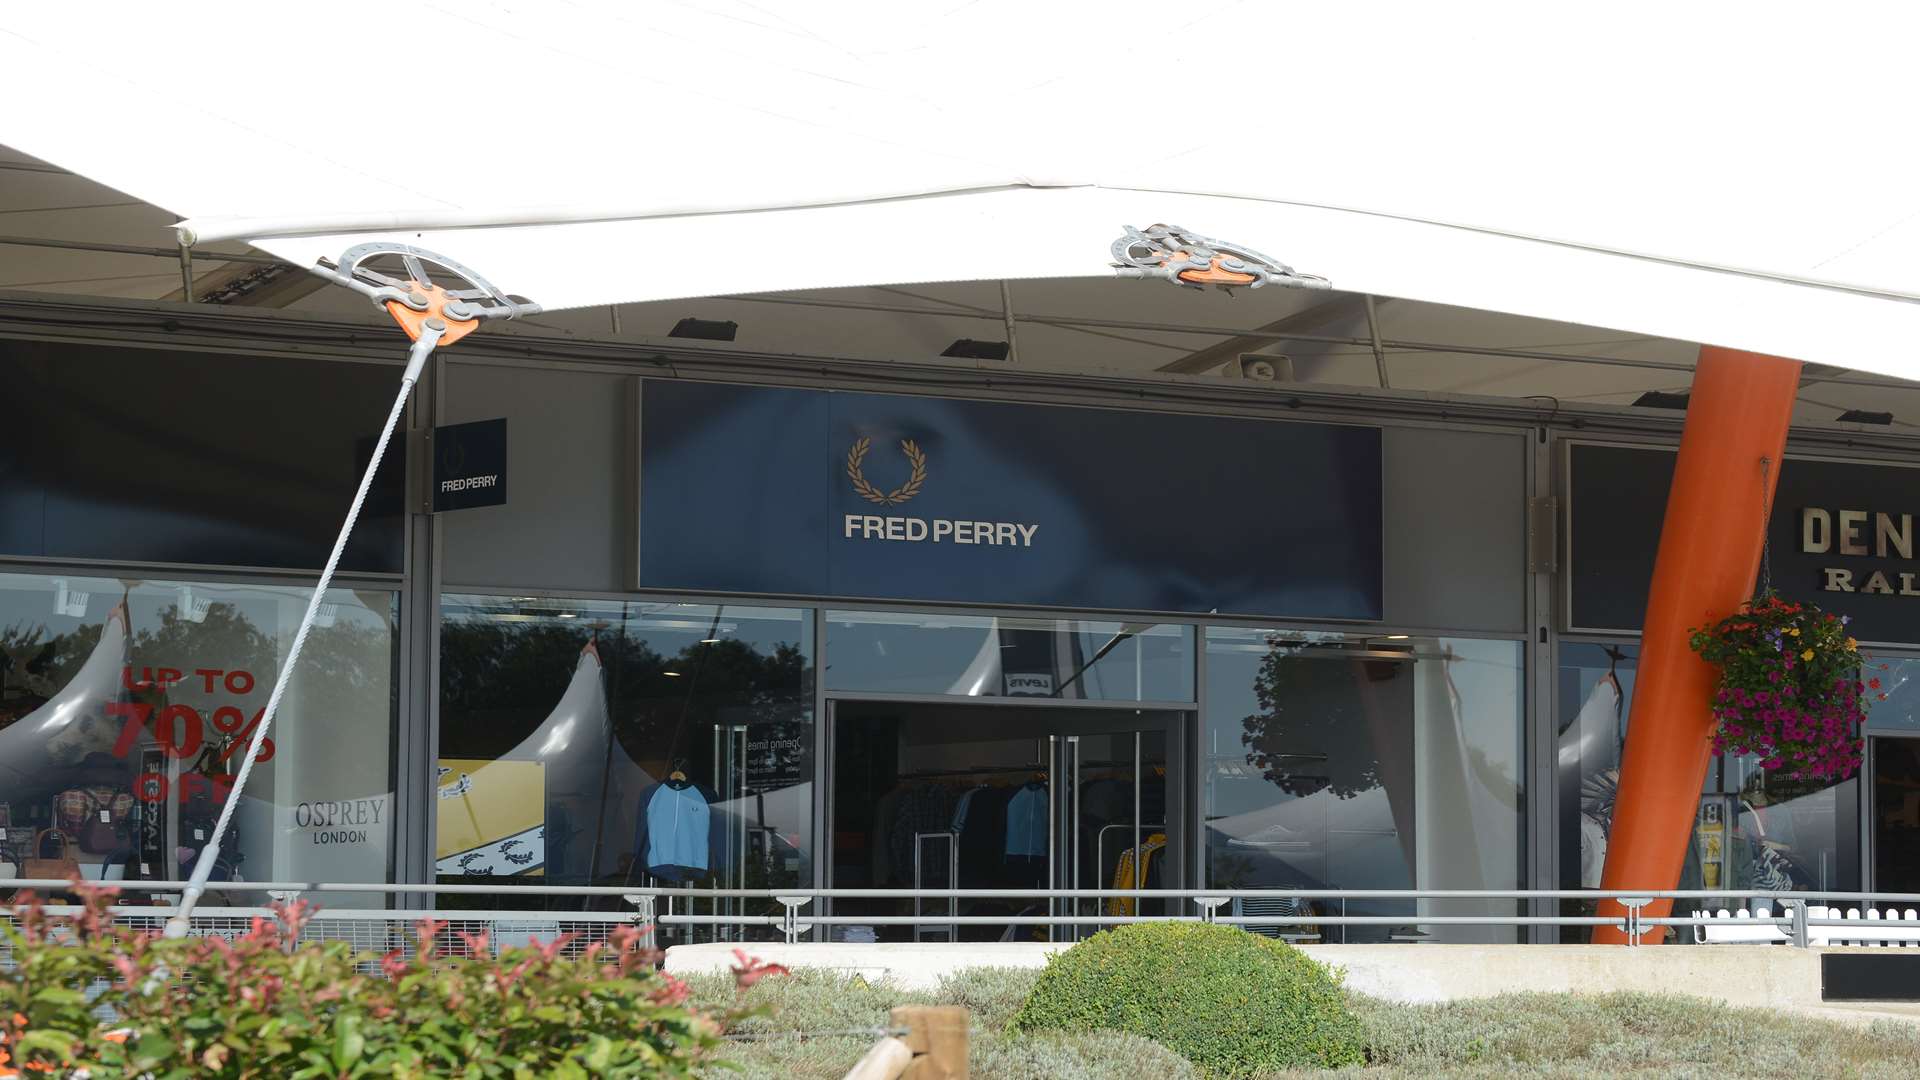 The pair are said to have "splashed the cash" at the Fred Perry store at Ashford Designer Outlet